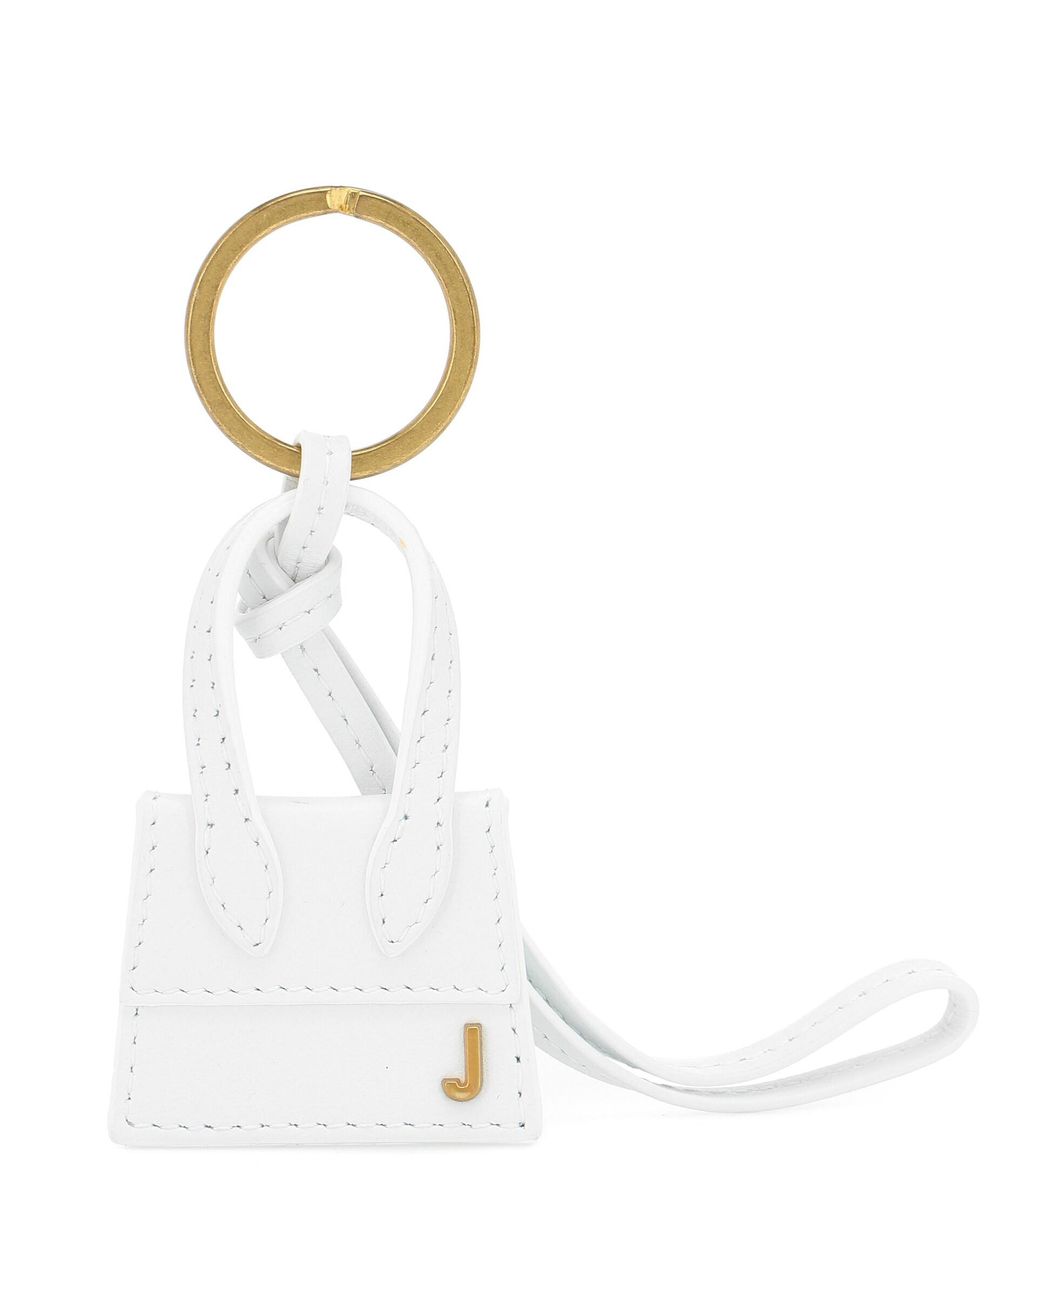 Jacquemus Le Porte Clés Chiquito Leather Keyring in White | Lyst